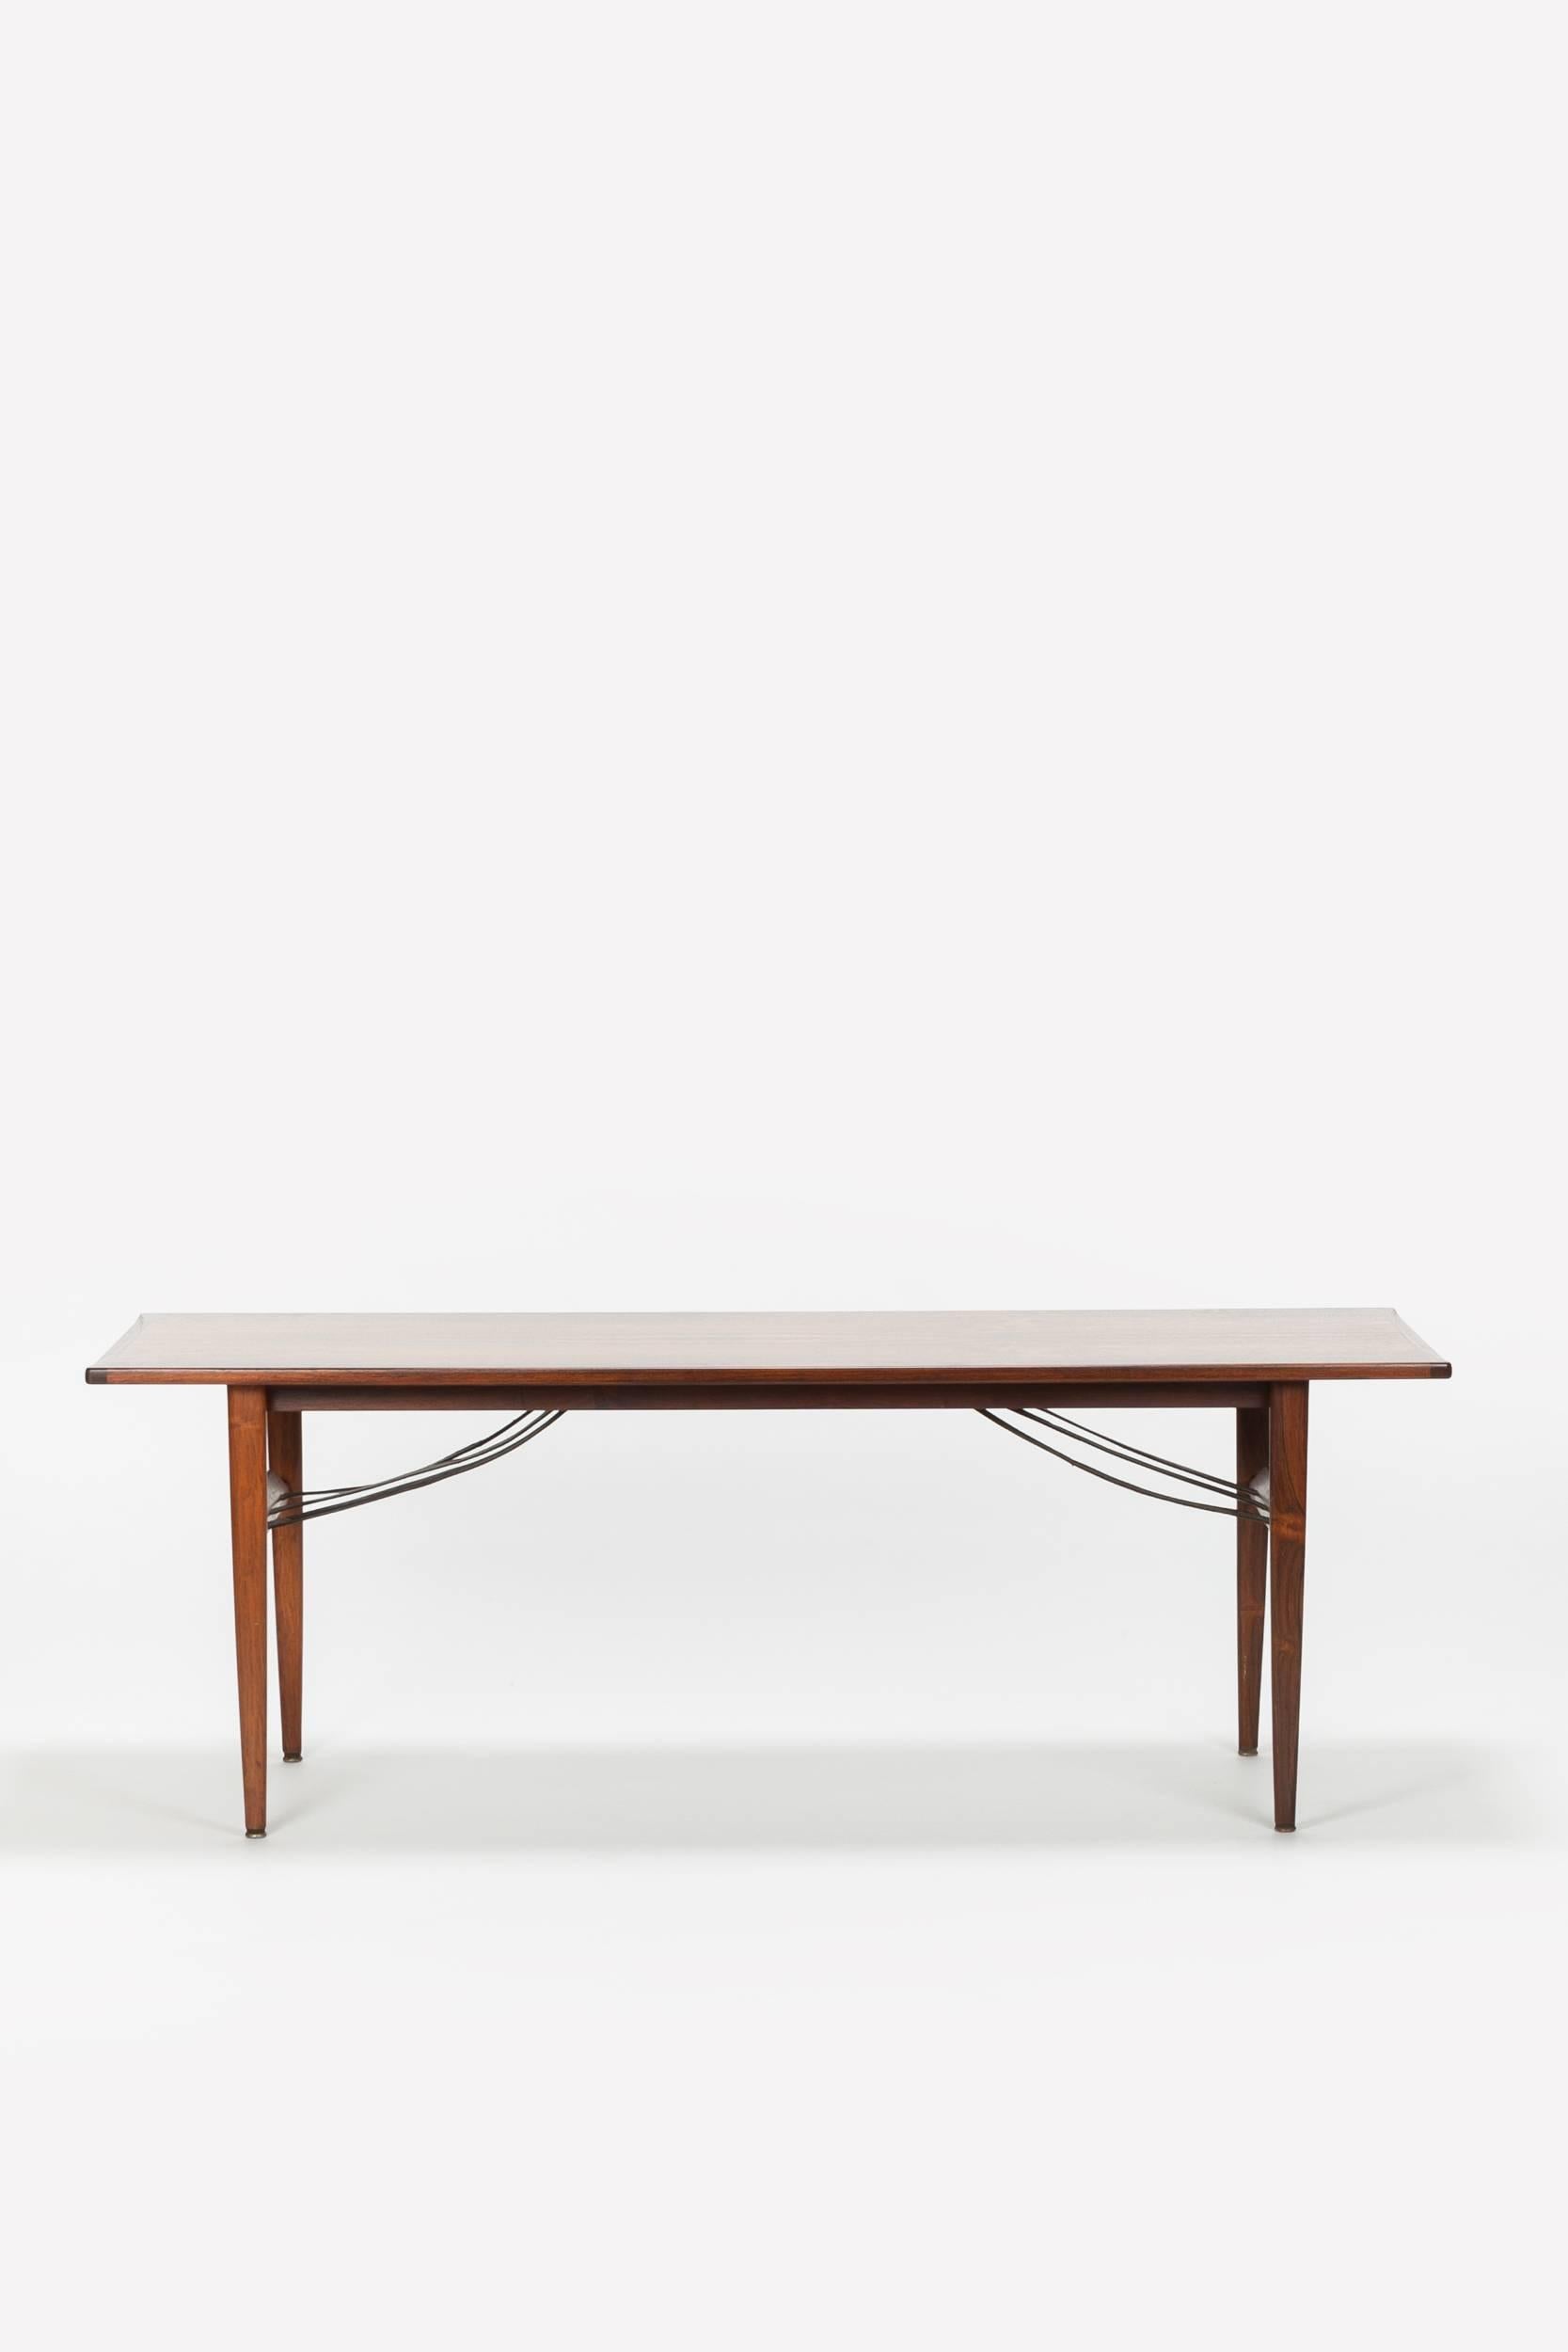 Very nice solid rosewood coffee table from the 1960s, manufactured in Denmark. A particularly beautiful detail are the leather straps which serve as a newspaper rack.